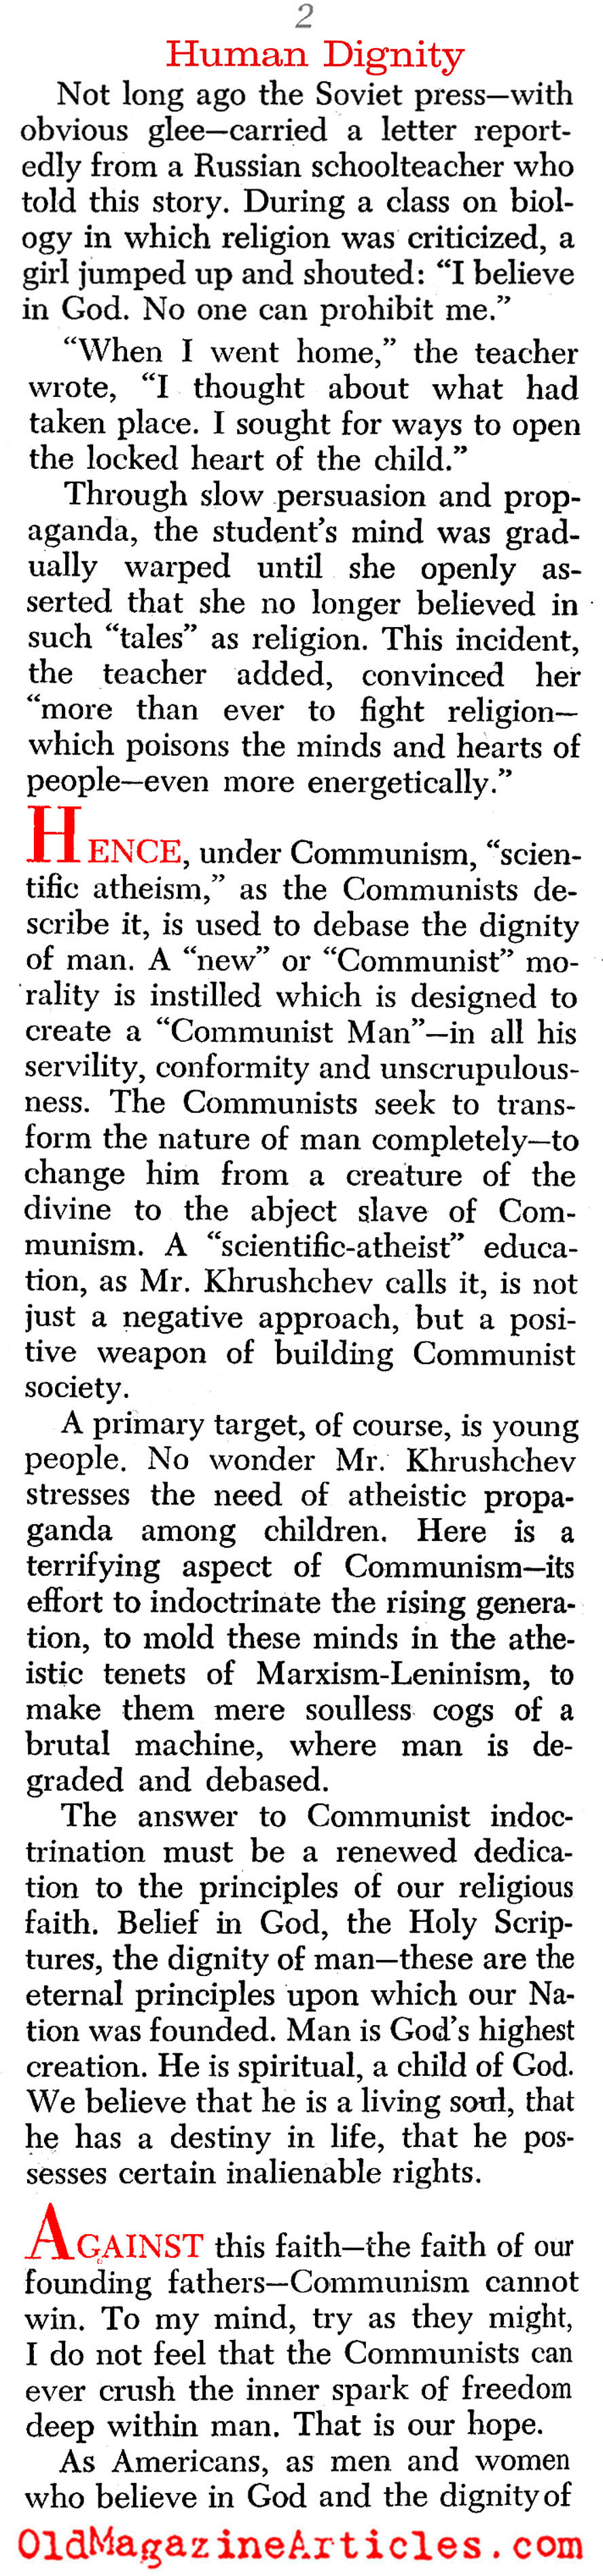 Calling Communism Out (Christian Herald, 1963)